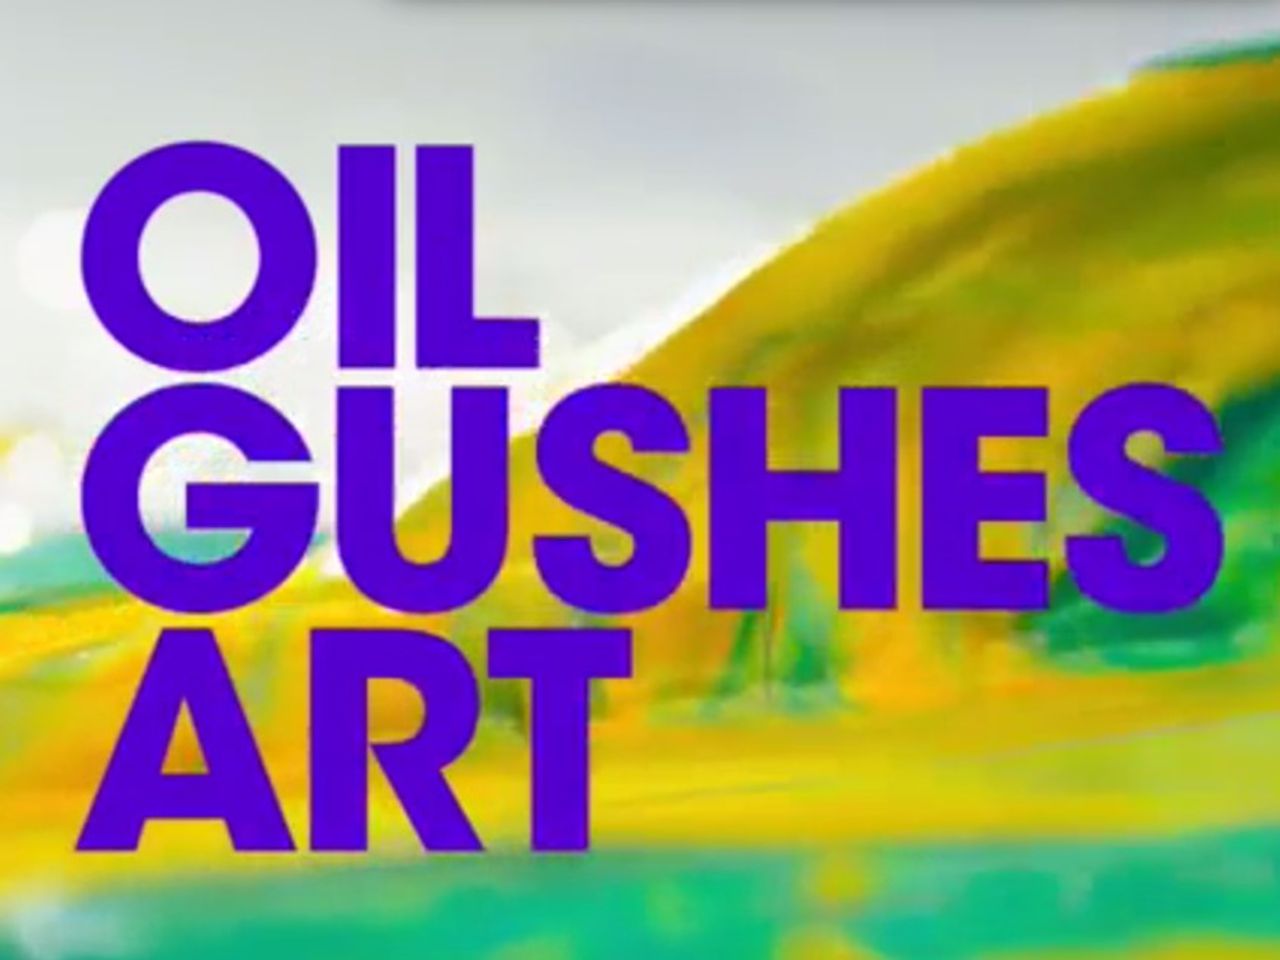 the-american-petroleum-institute-ran-a-super-bowl-ad-saying-oil-gushes-art--and-some-people-were-furious